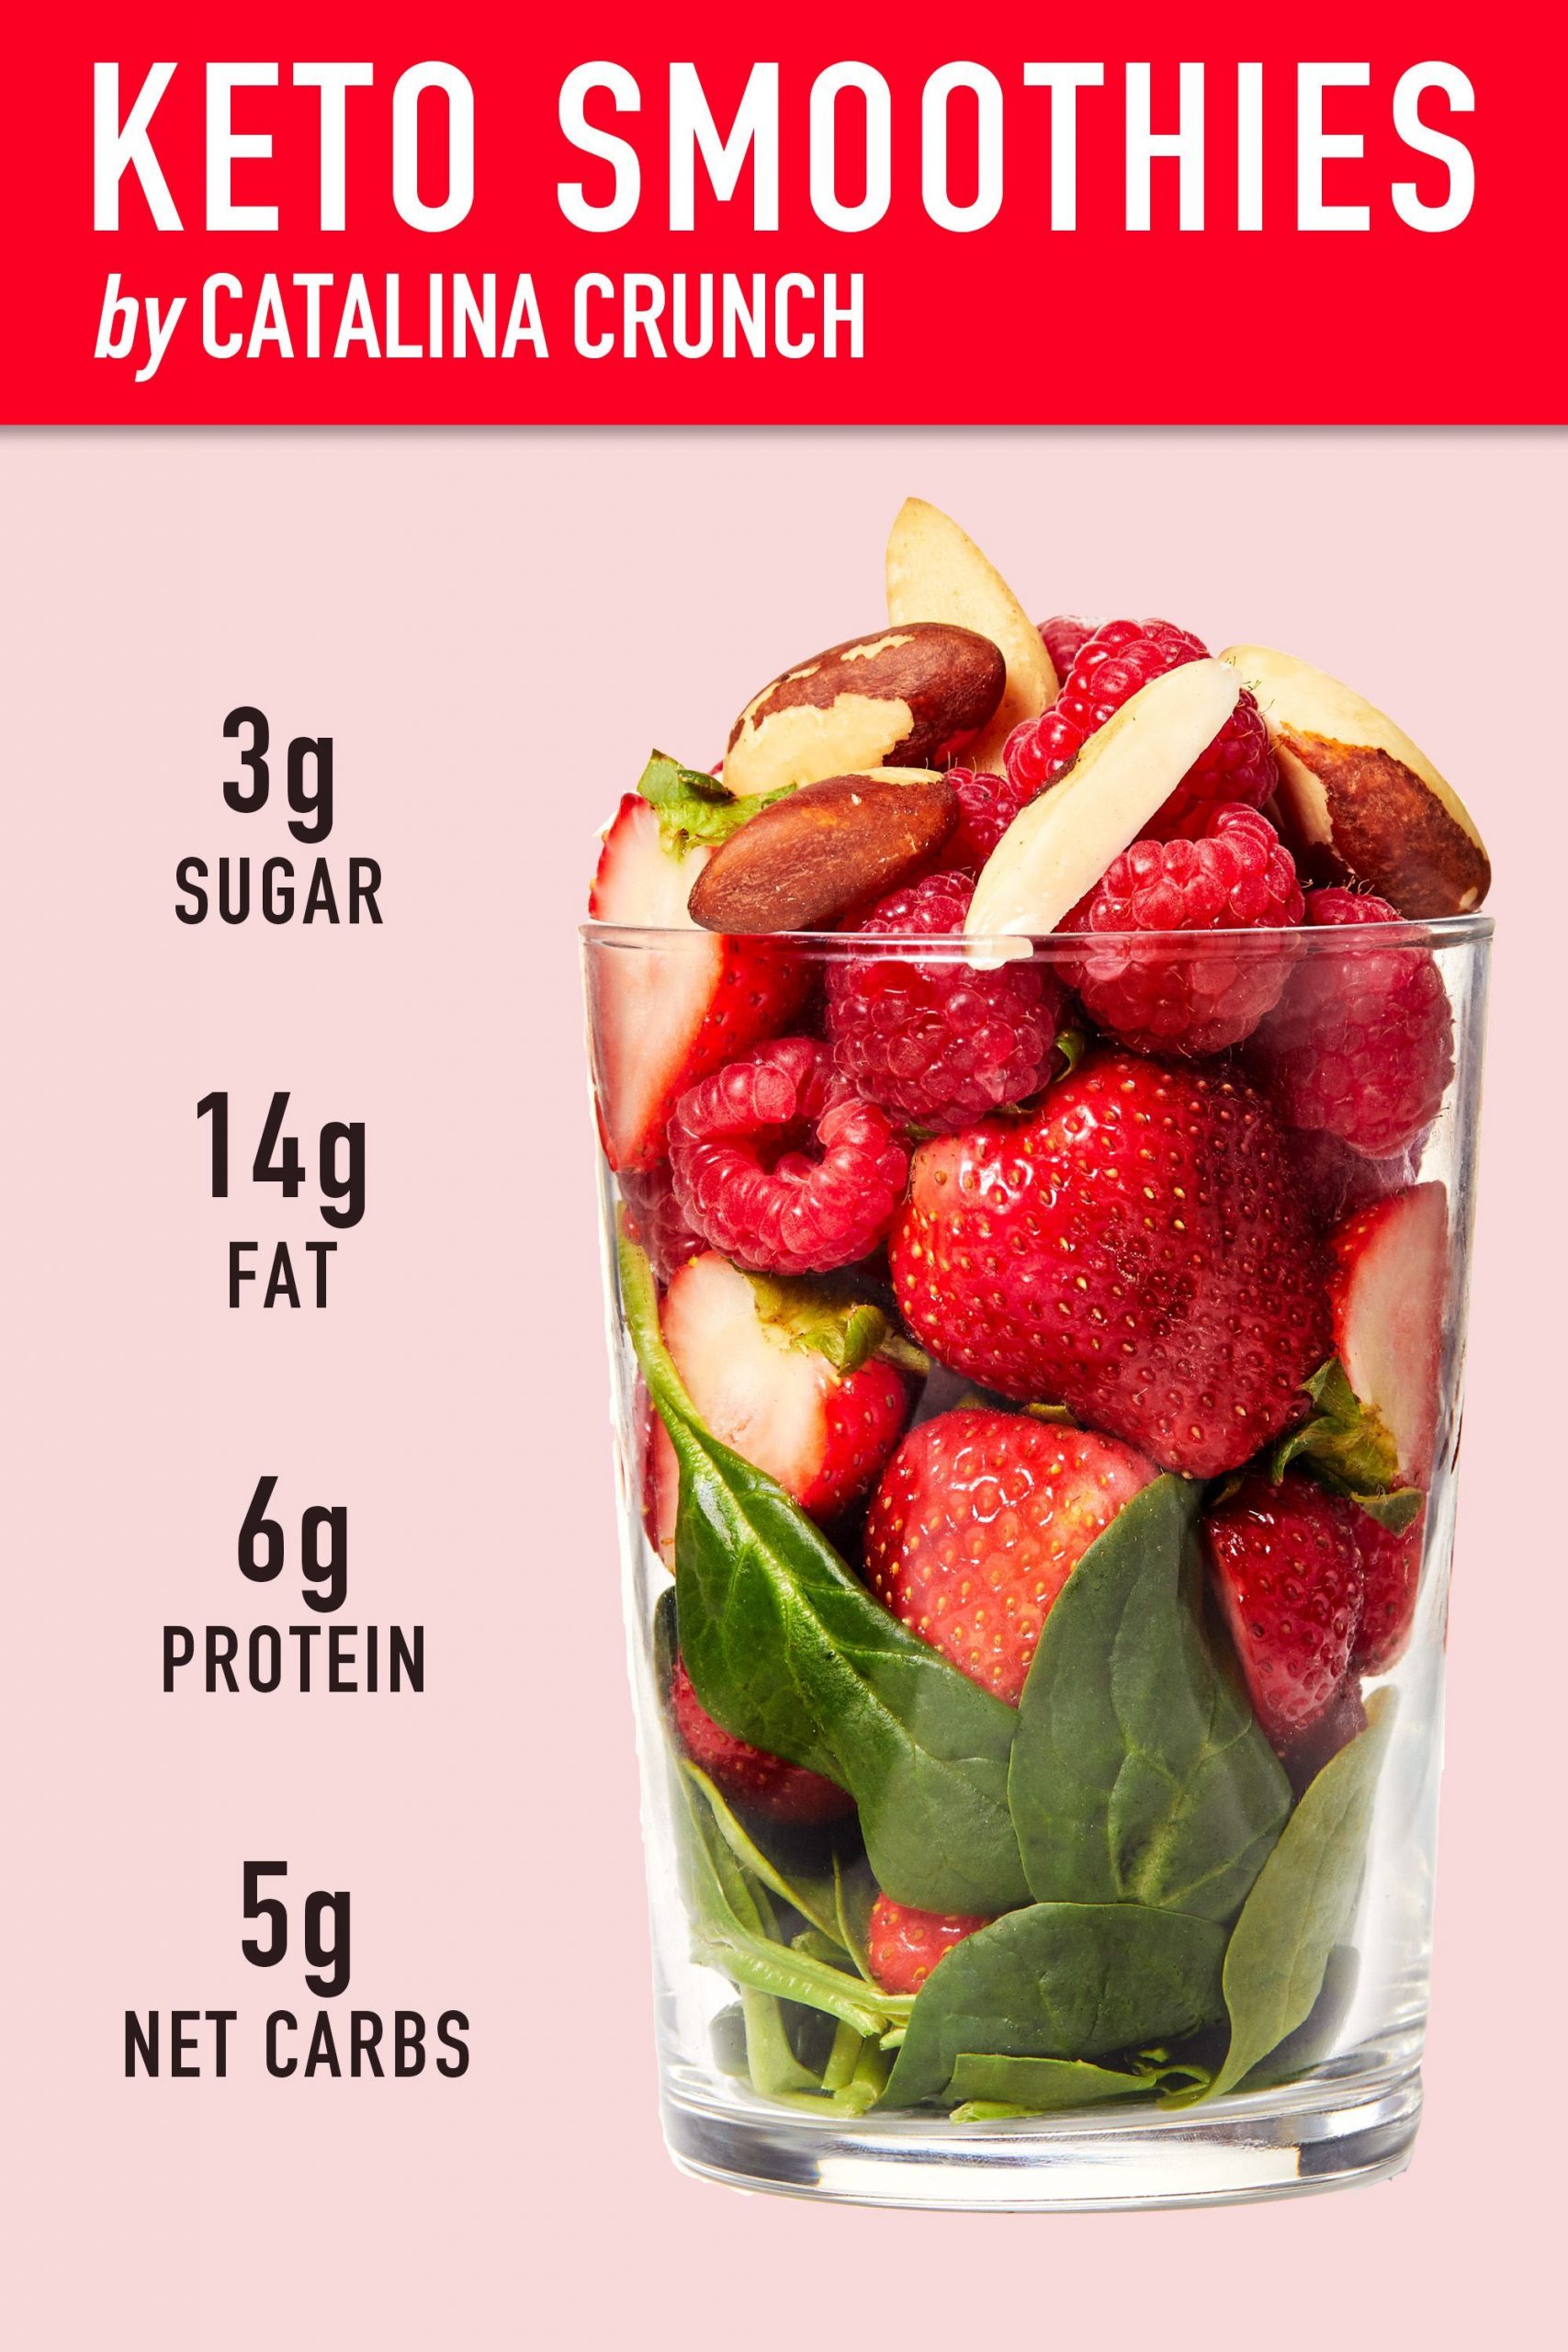 Keto smoothies, only 3g of sugar!